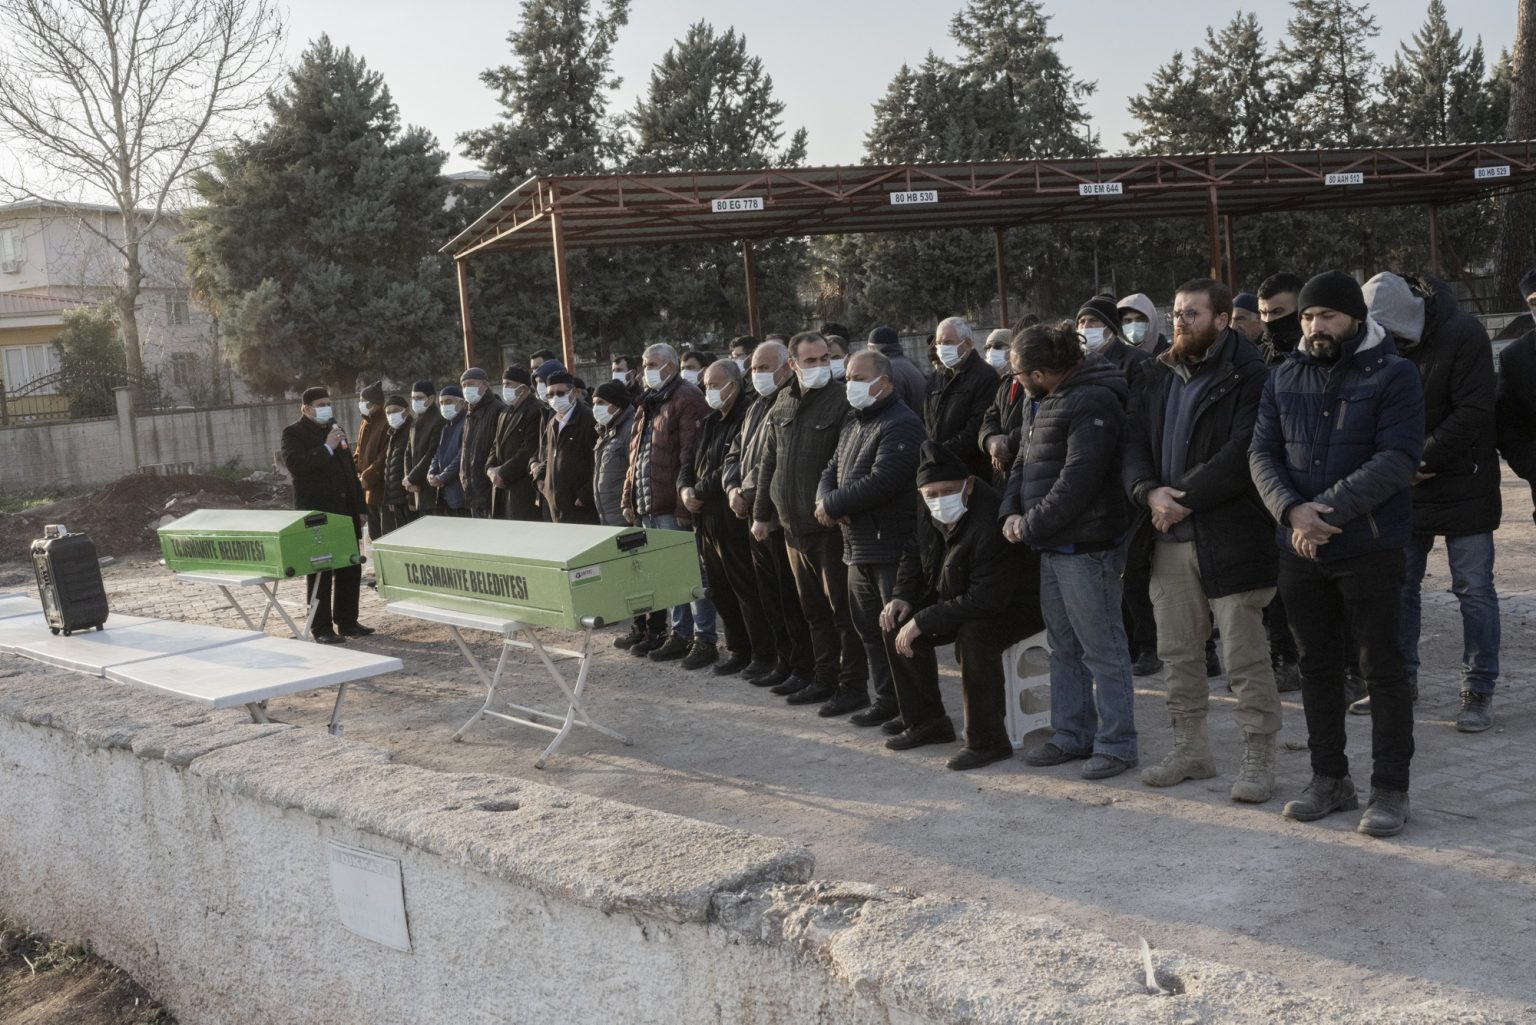 Osmaniye, Turkey, February 2023 - The aftermath of the earthquake that hit southern Turkey and northern Syria.     A funeral ceremony at the entrance of Osmaniye Cemetery before burial. ><
Osmaniye, Turchia, febbraio 2023  Le conseguenze del terremoto che ha colpito la Turchia del Sud e la Siria del nord.